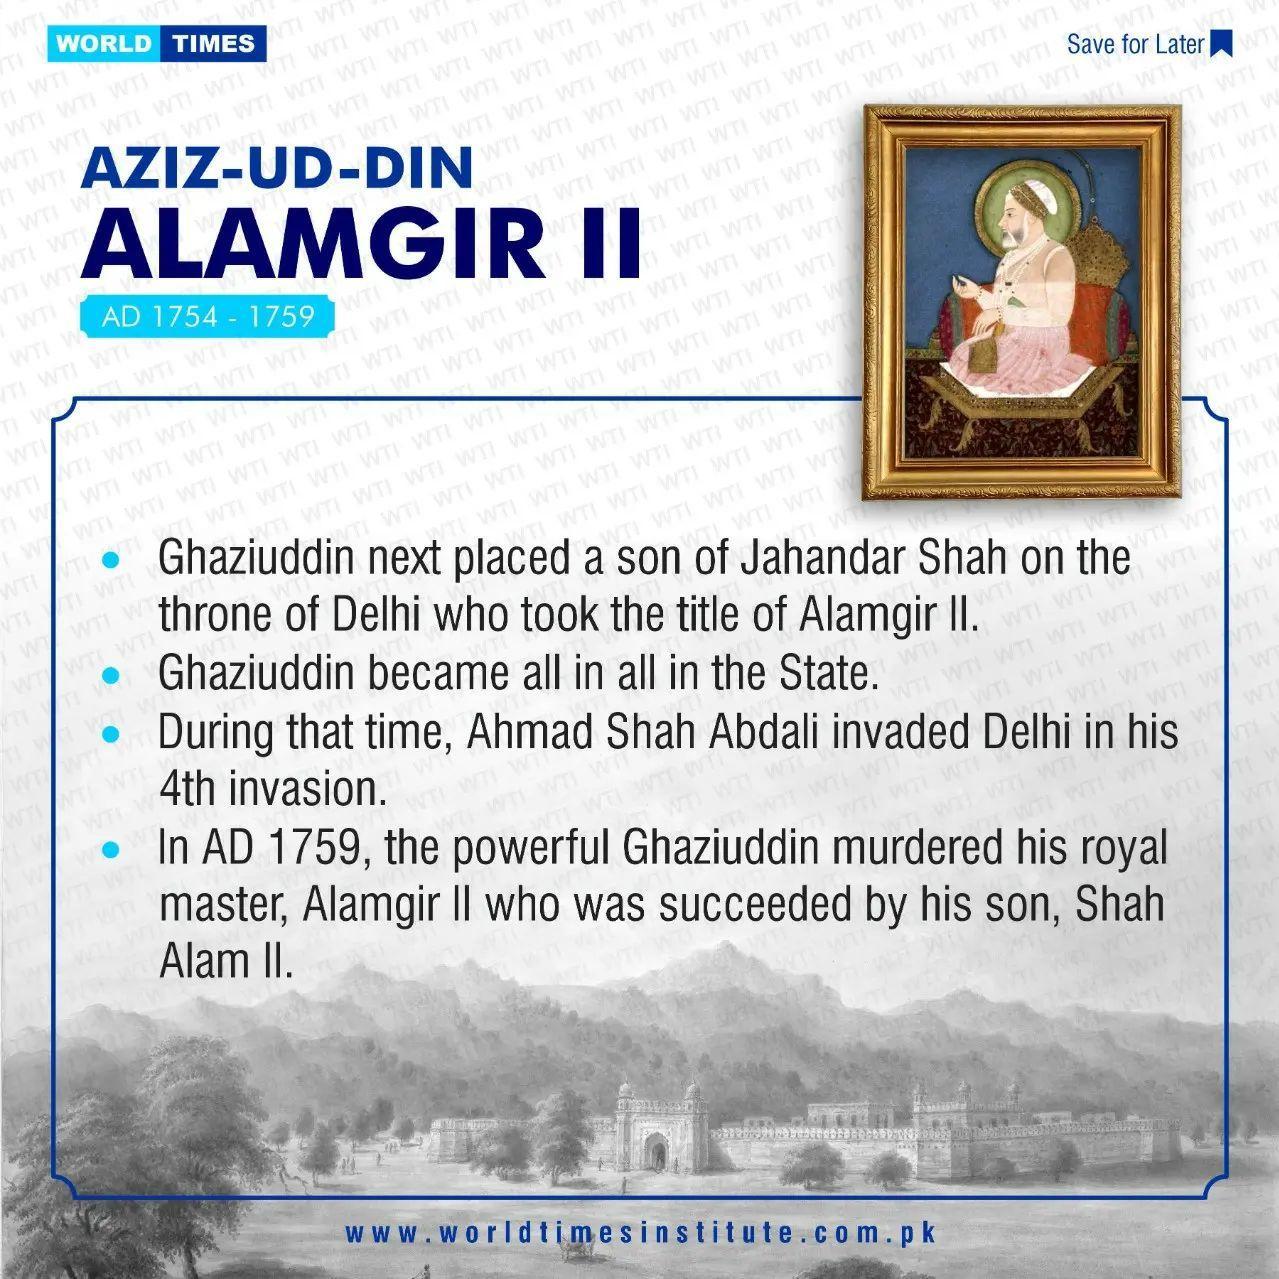 You are currently viewing Aziz-ud-din Alamgir II AD 1754-1759